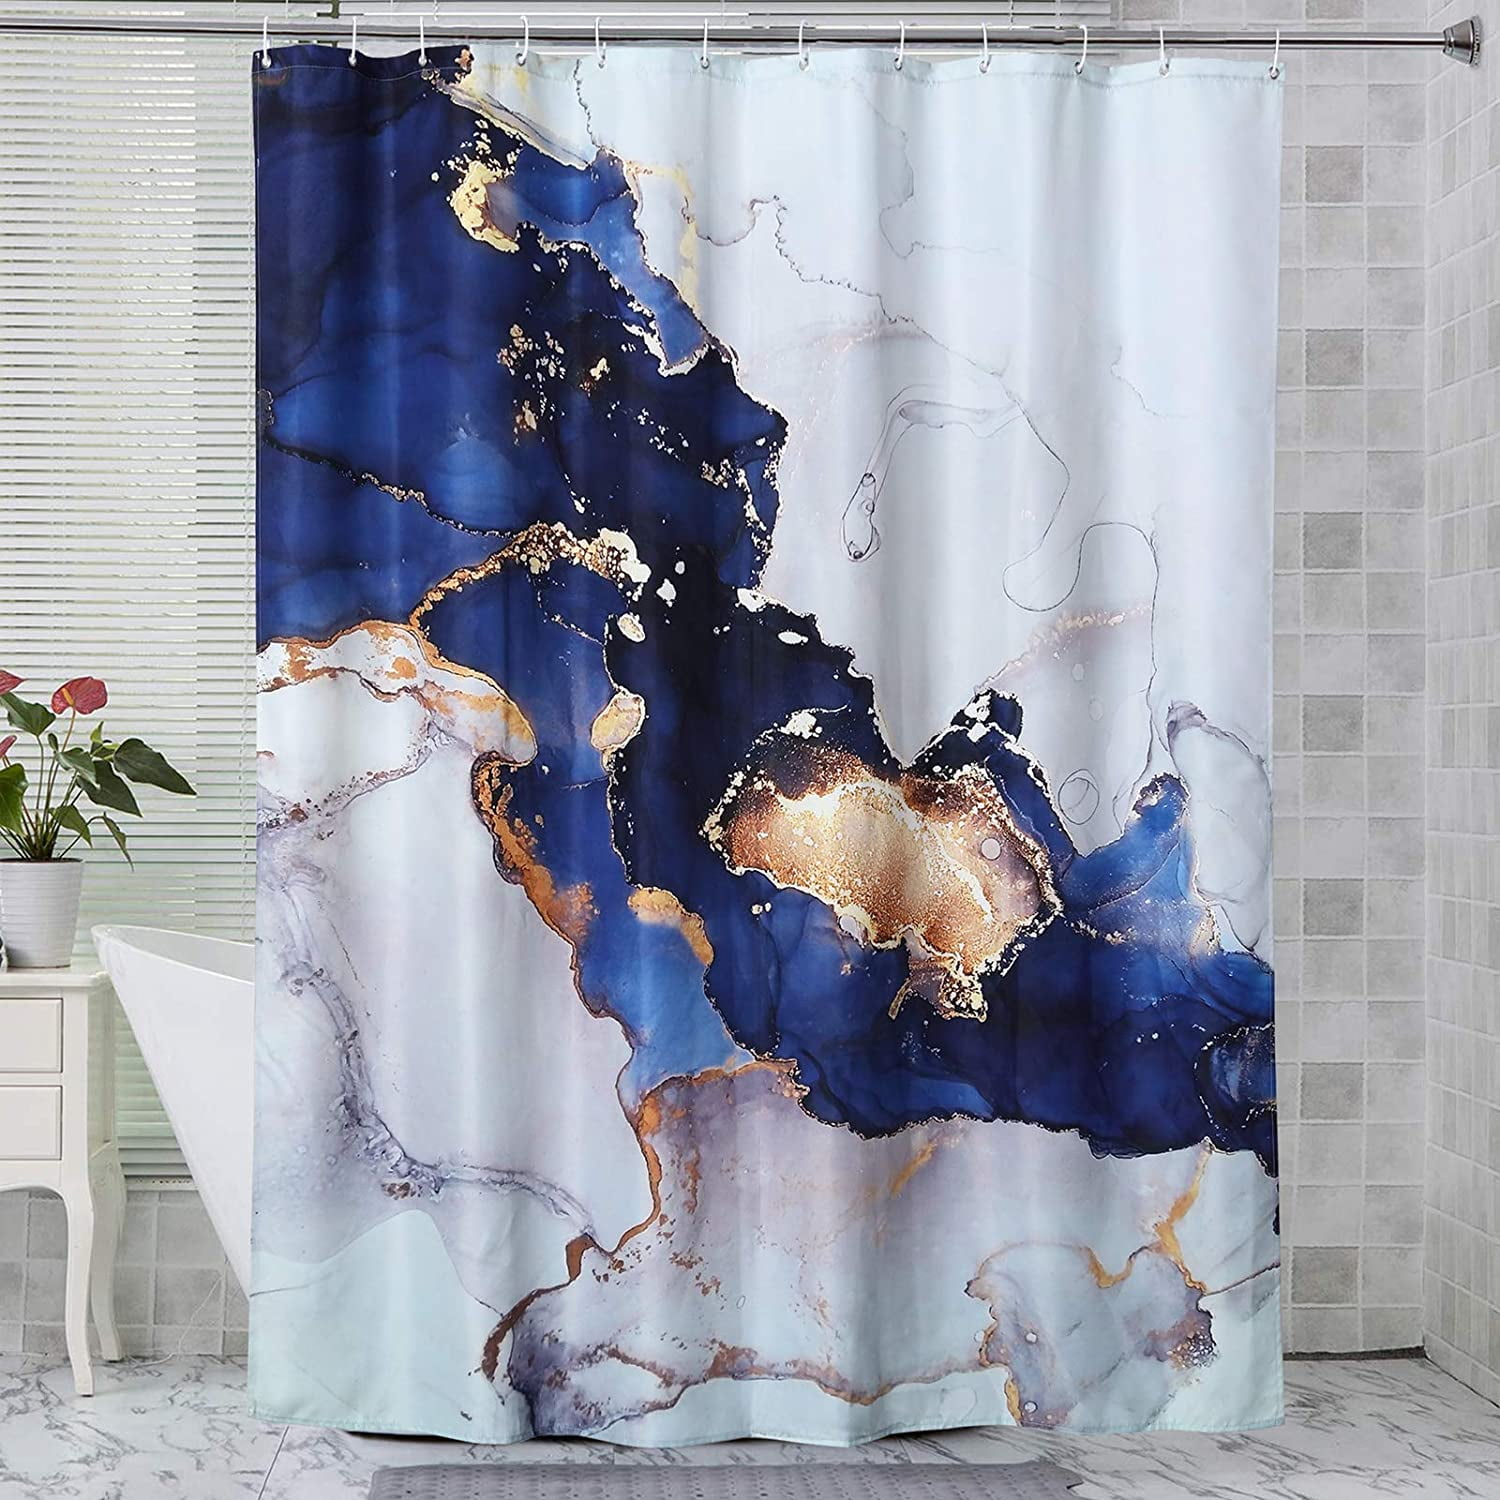 Luxury Blue Modern Stall Fabric Shower Curtain 36 Inch RoomTalks Navy Marble Abstract Art Painting Small Bathroom Shower Curtain Sets Waterproof Bath Curtain 36/’/’W x 72/’/’L, Blue